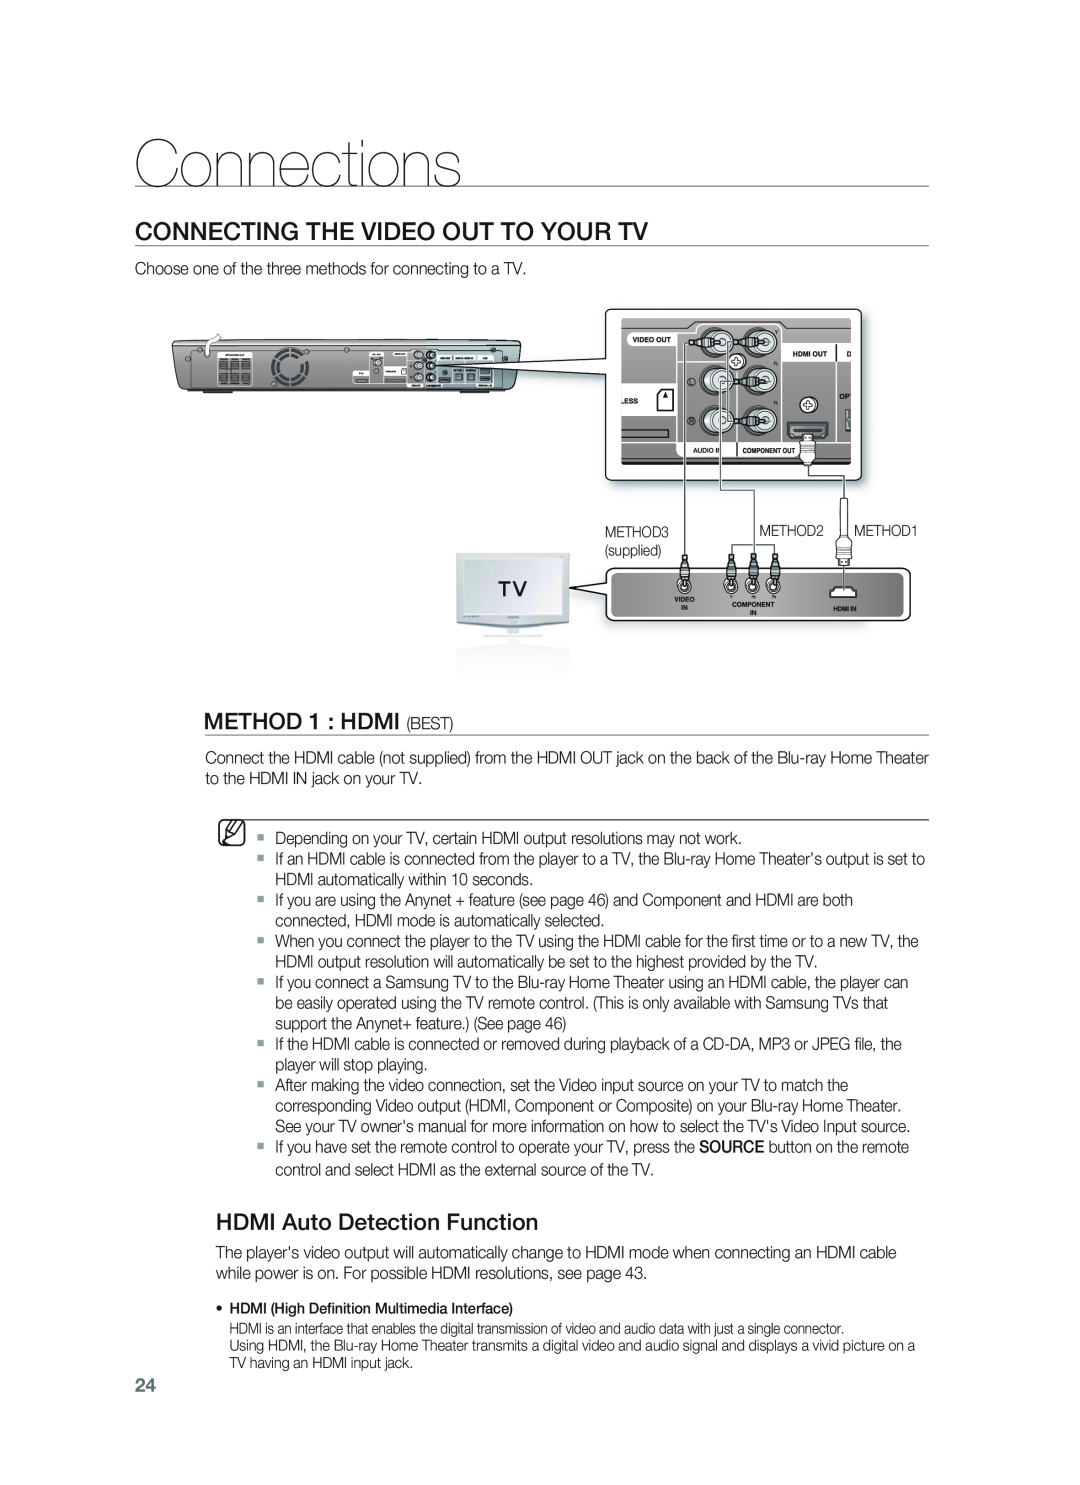 Samsung HT-BD1255 Connecting The Video Out To Your Tv, METHOD 1 : HDMI BEST, HDMI Auto Detection Function, Connections 